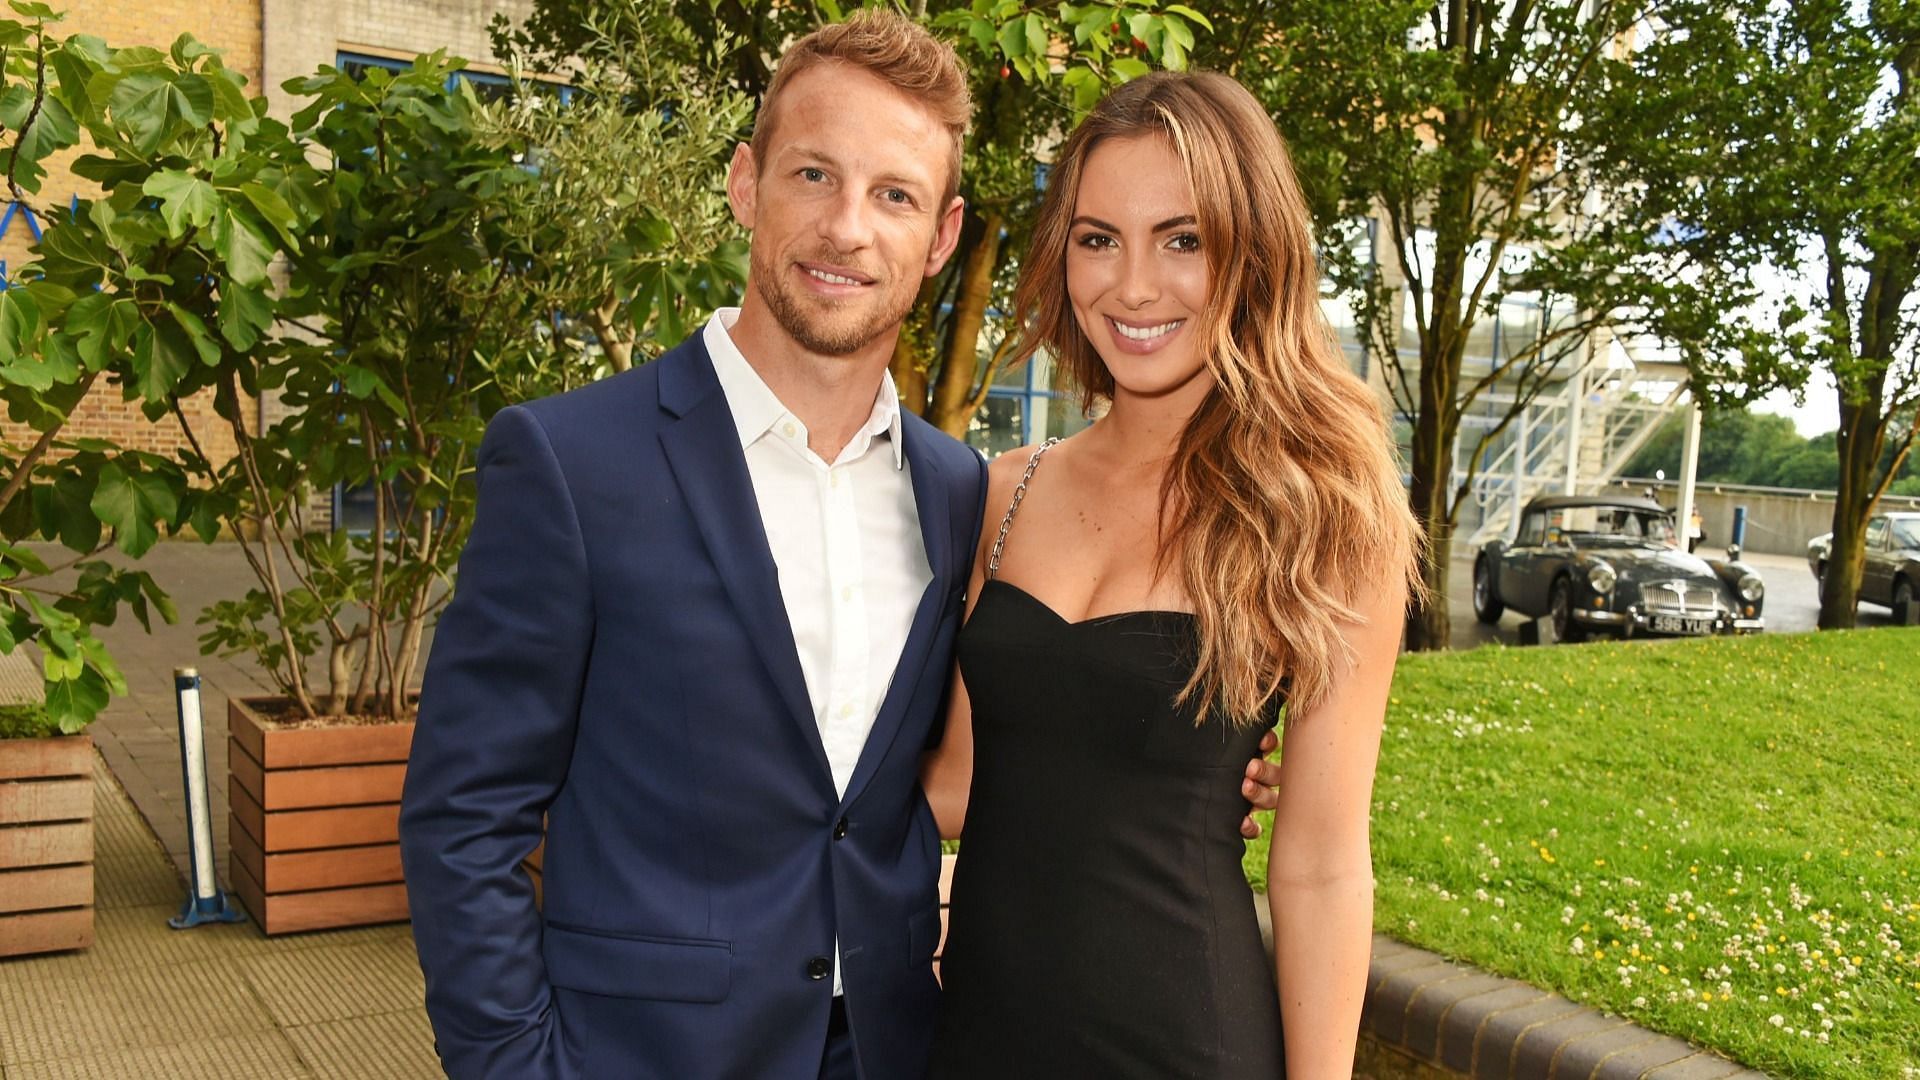 Jenson Buttons started dating model girlfriend Brittny Ward in 2016 (Image via Getty Images/ David M. Benett)